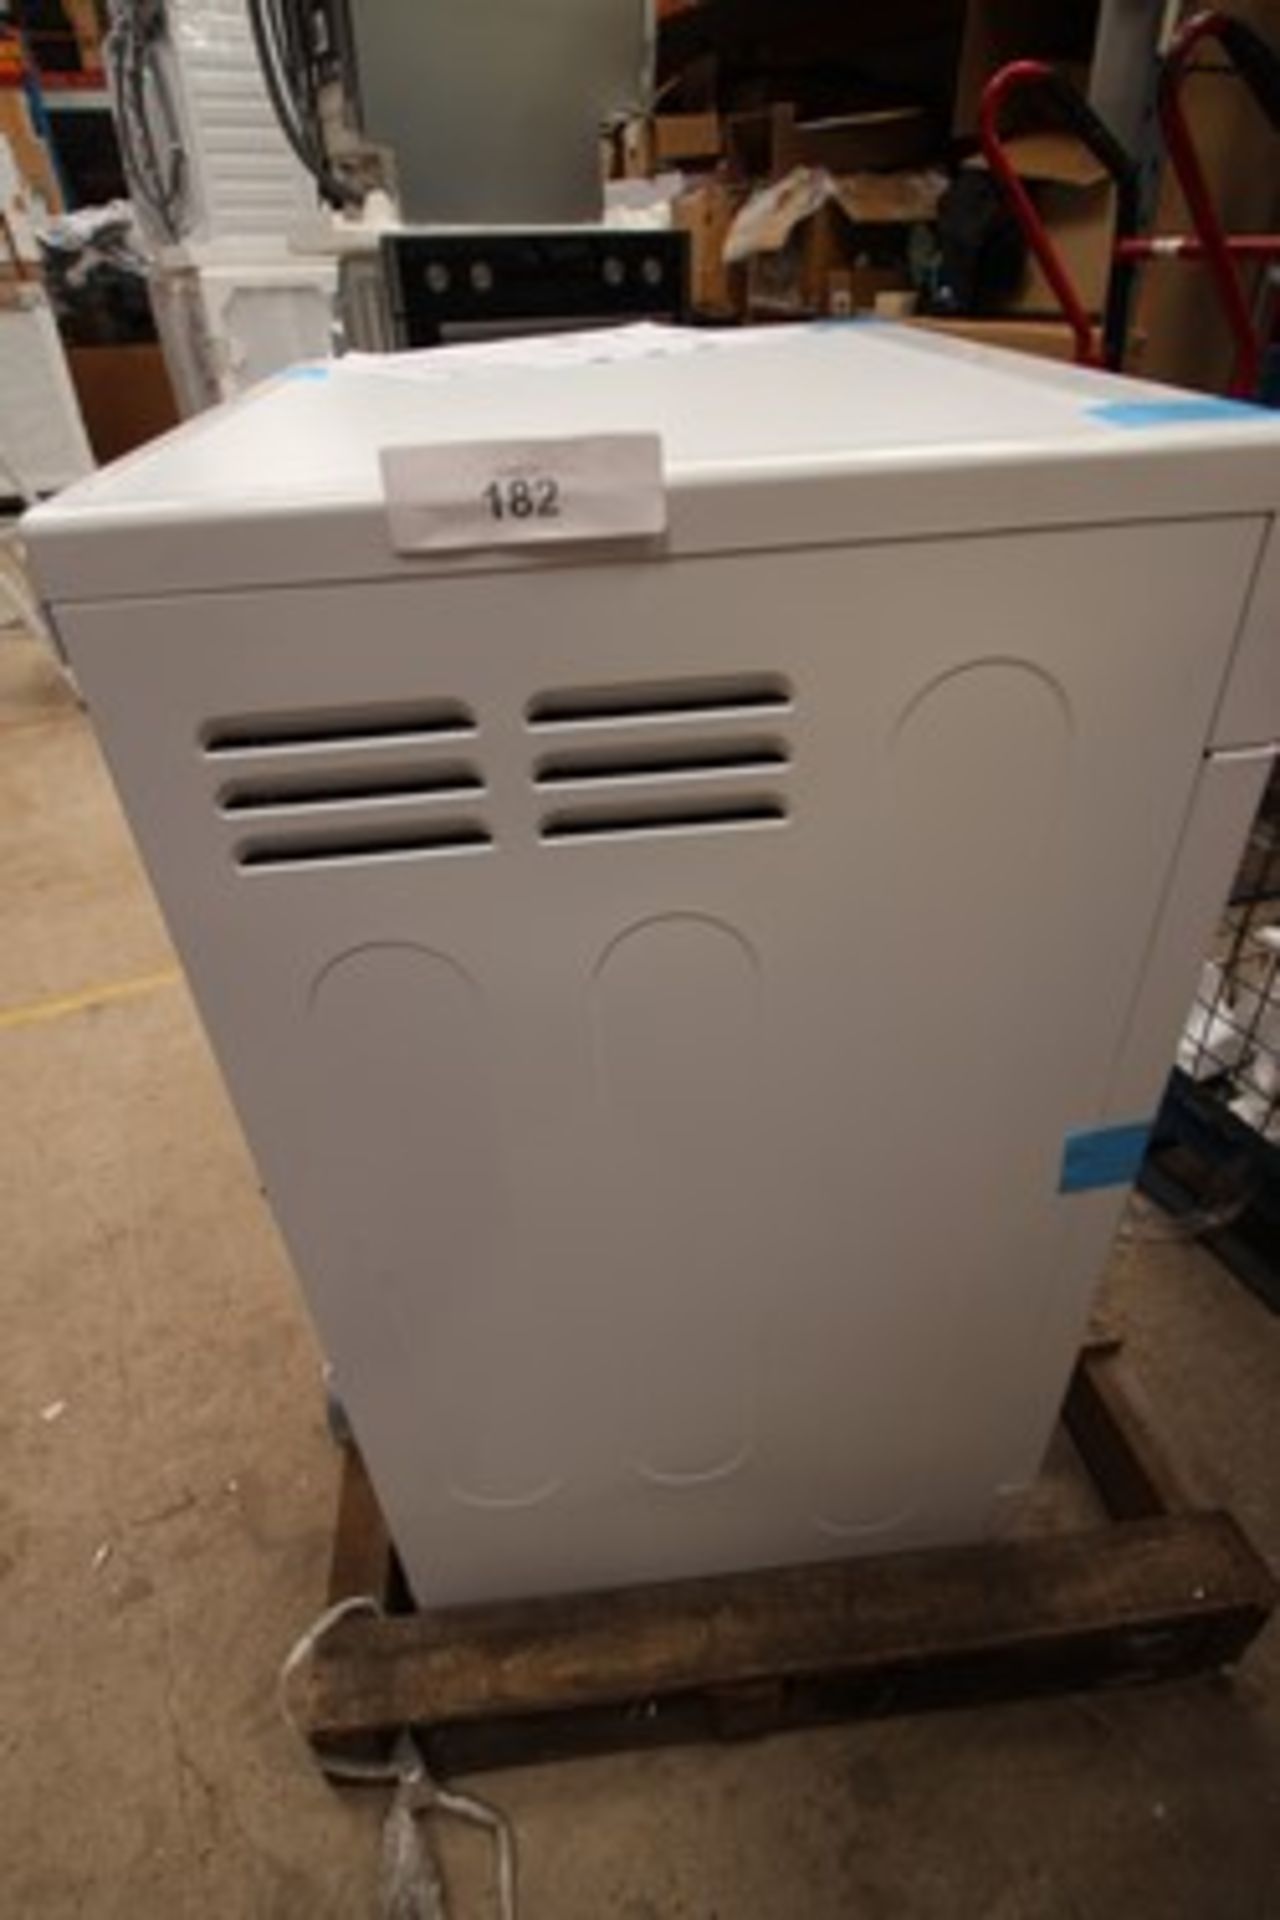 1 x Indesit 8kg tumble dryer, Model 1632130, dented right hand side panel - New (eBay 7) - Image 3 of 3